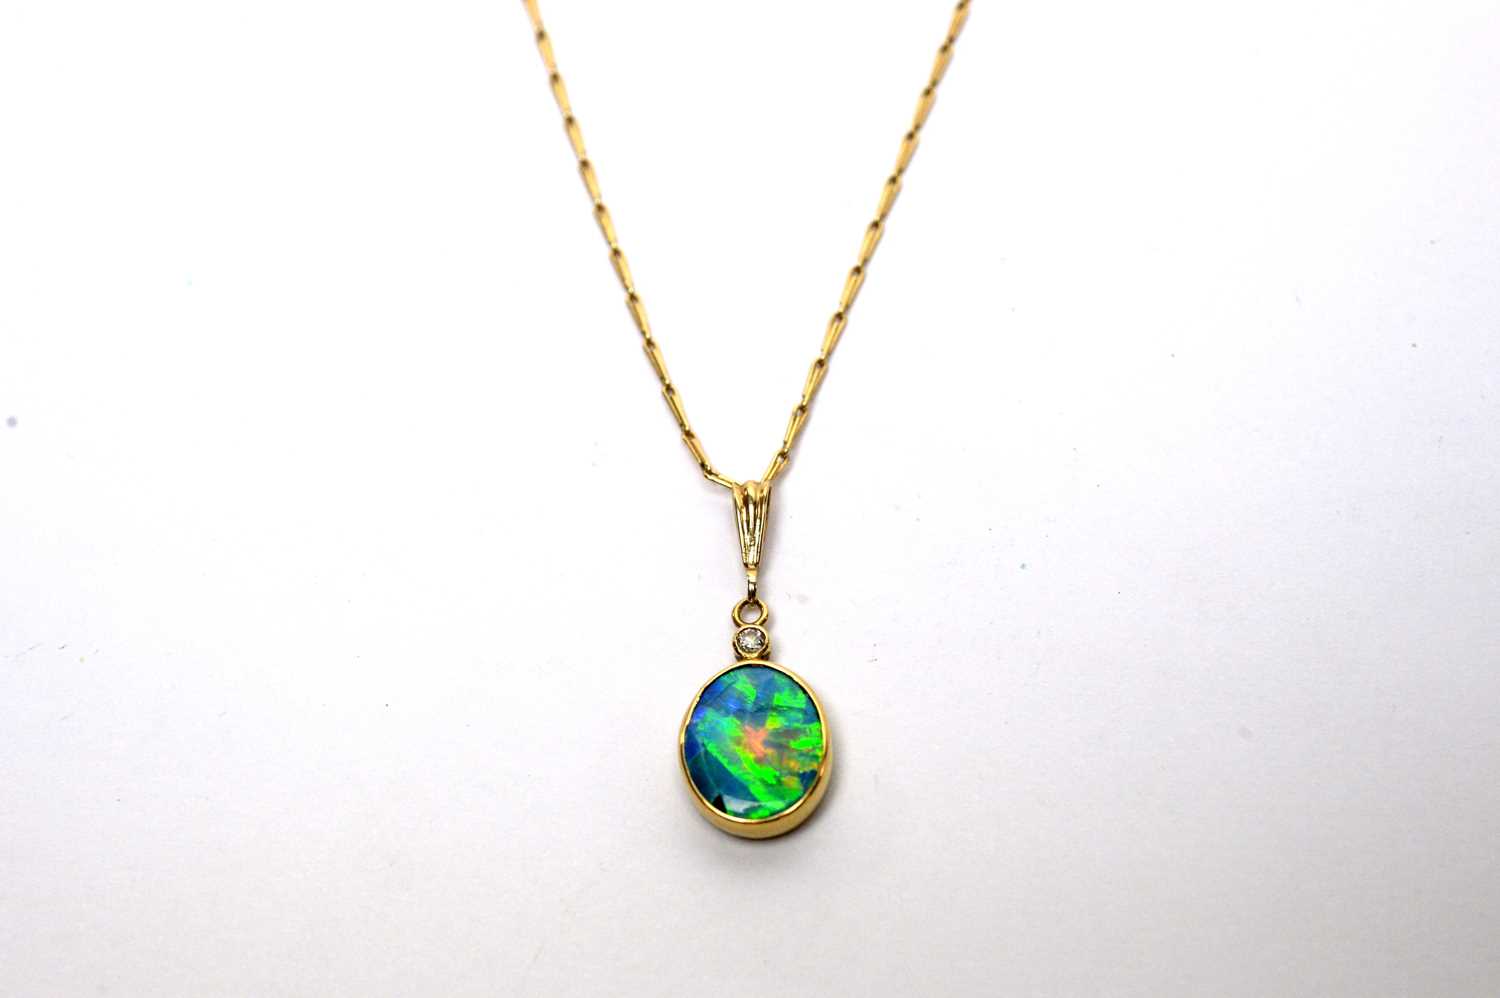 An opal and diamond pendant on chain. - Image 2 of 5